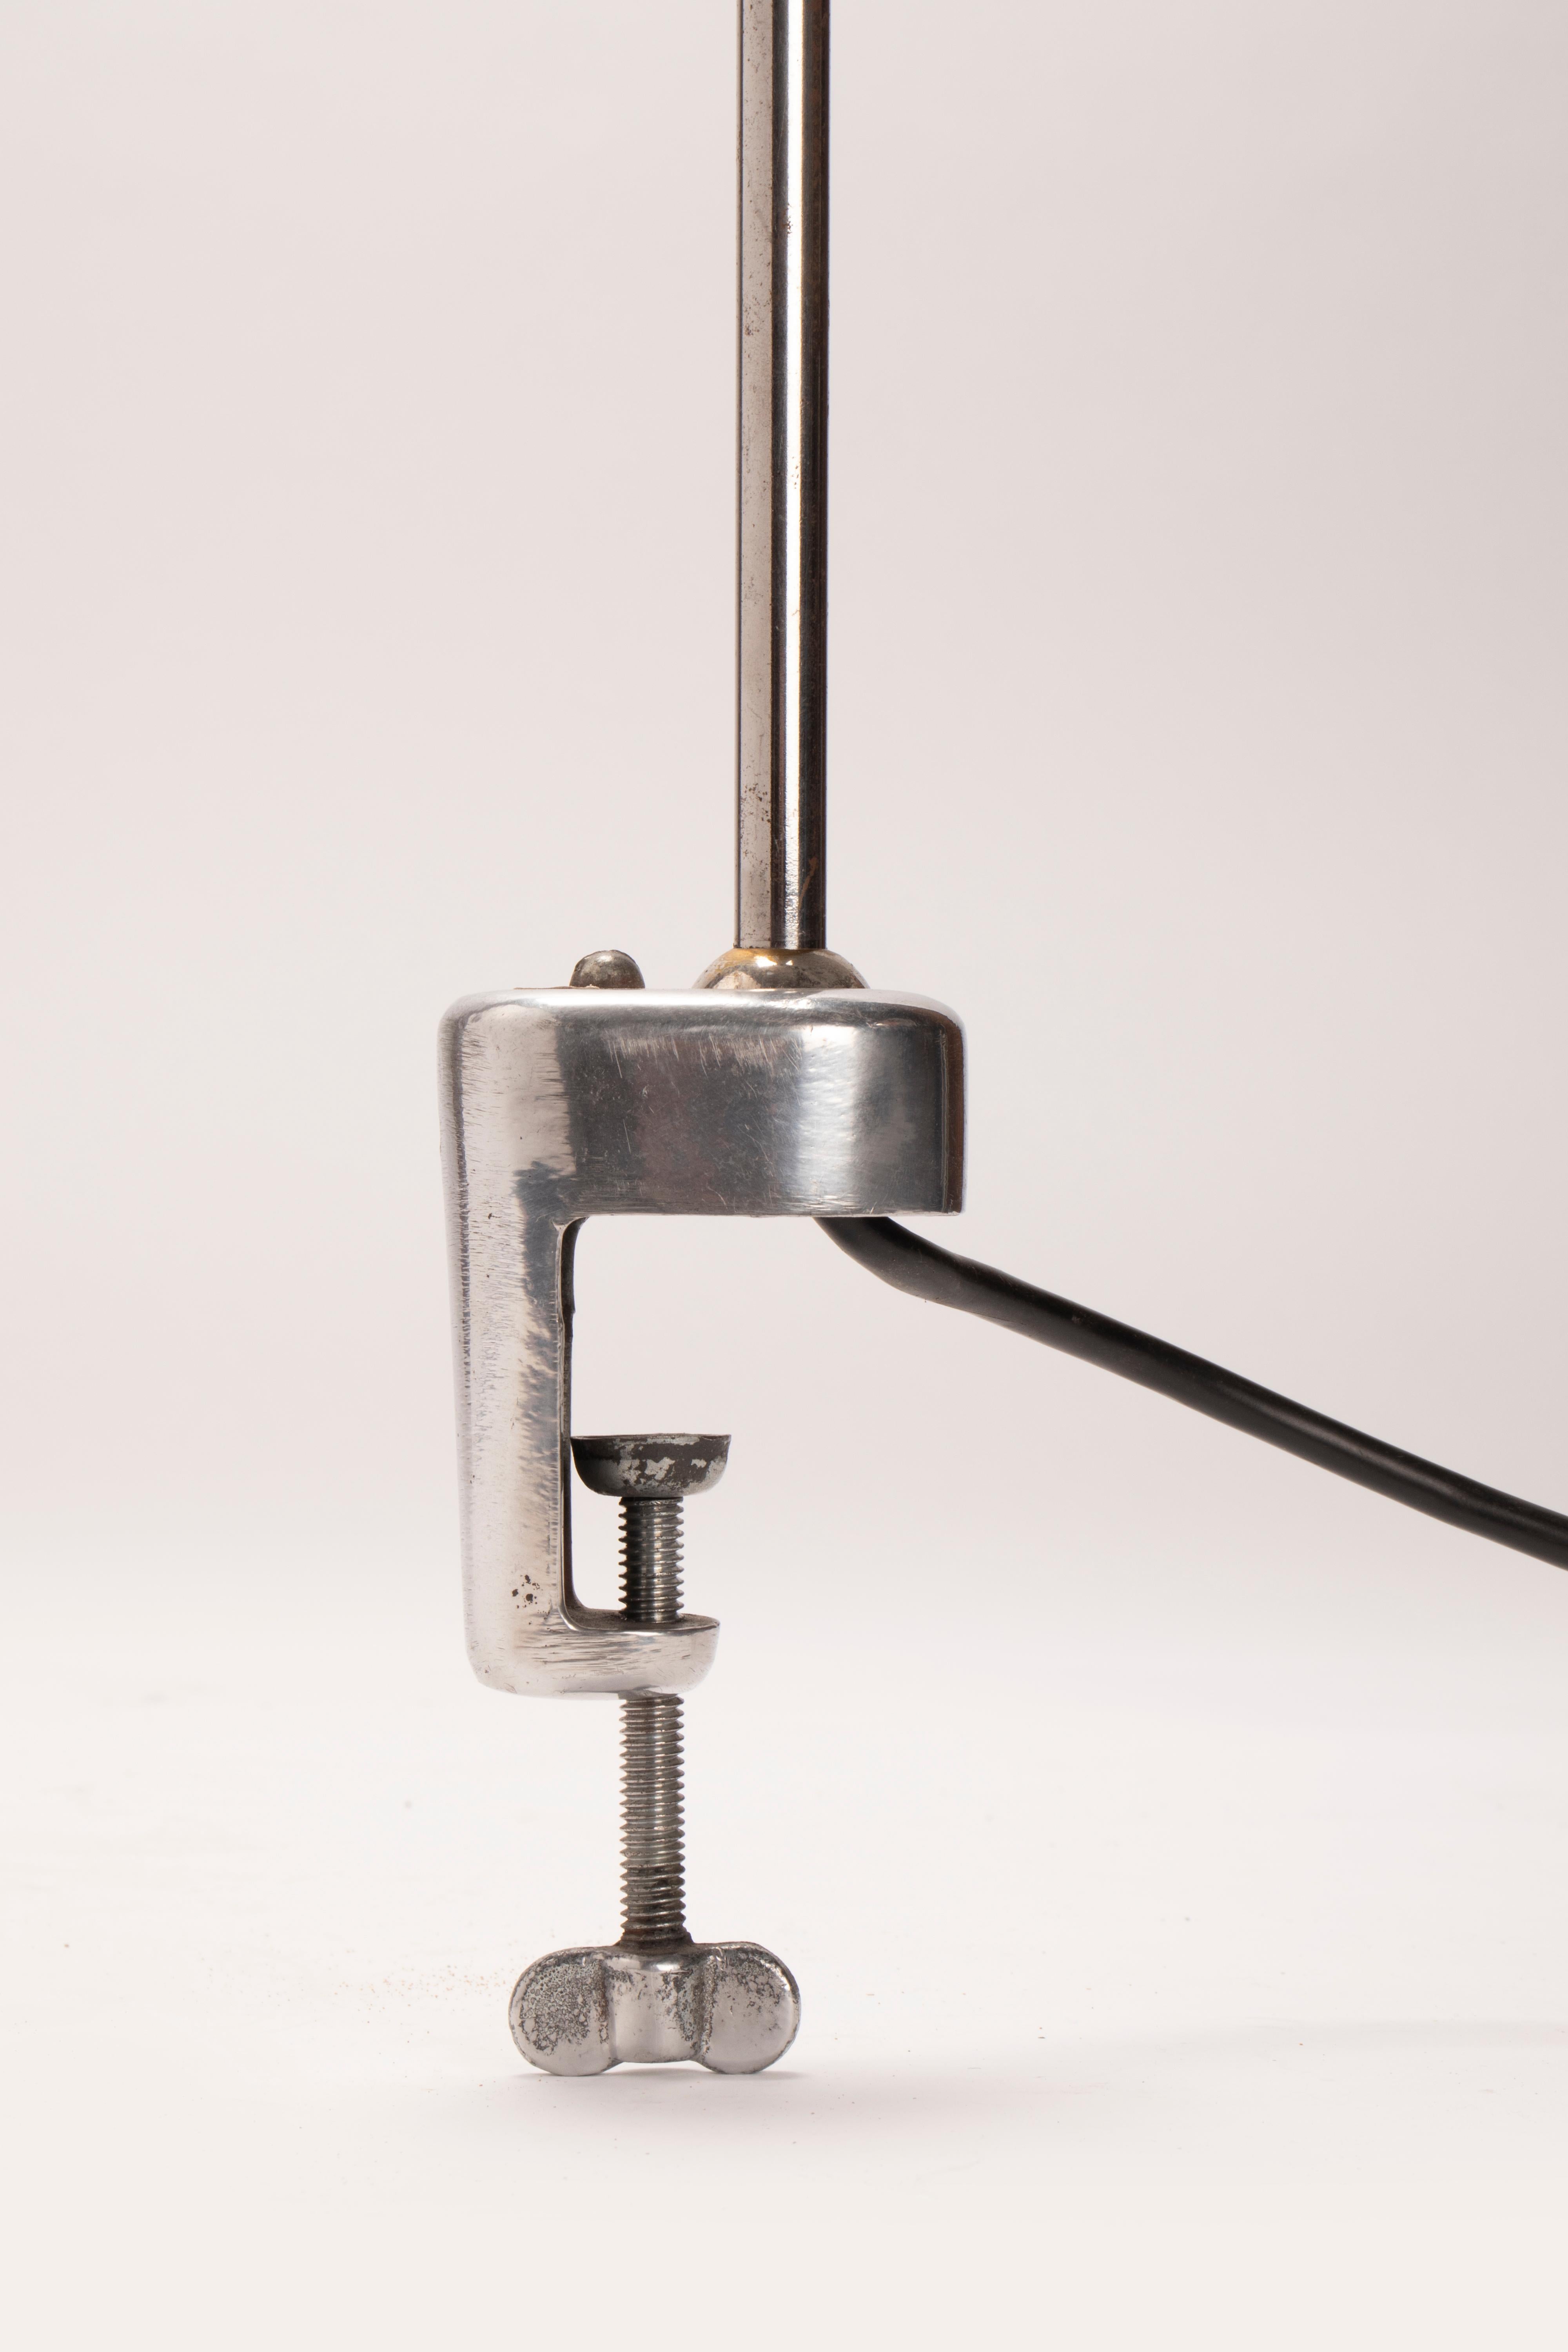 Aluminum Adjustable Table Lamp with Clamp, France, 1930